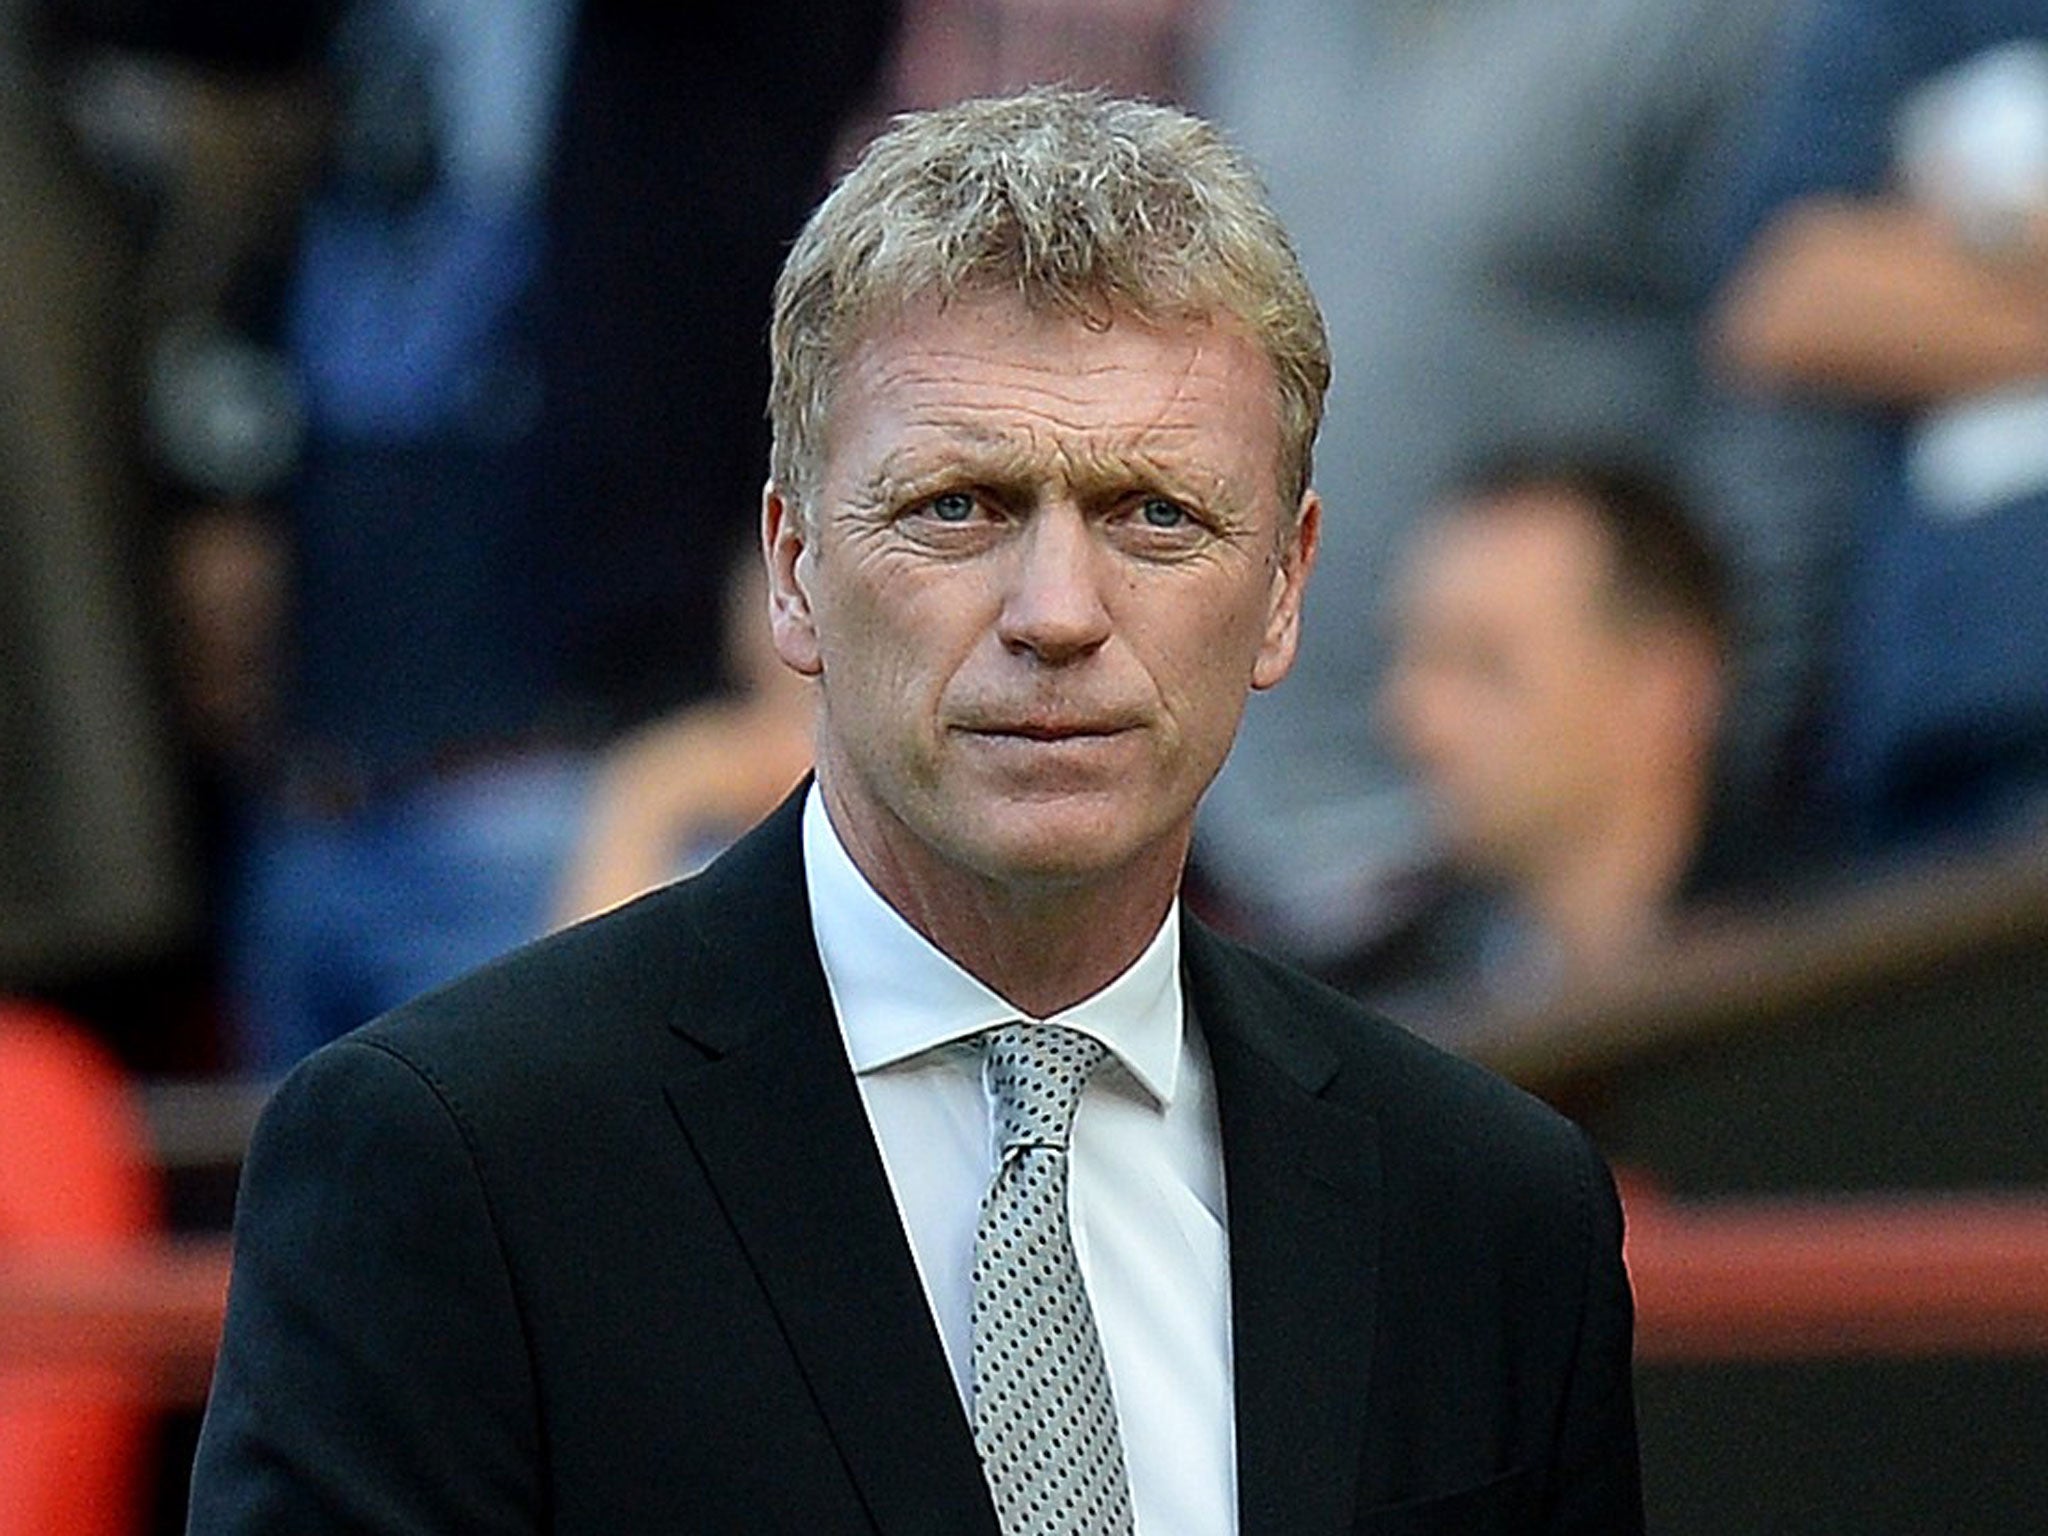 A win at Shakhtar will be a great comfort for David Moyes